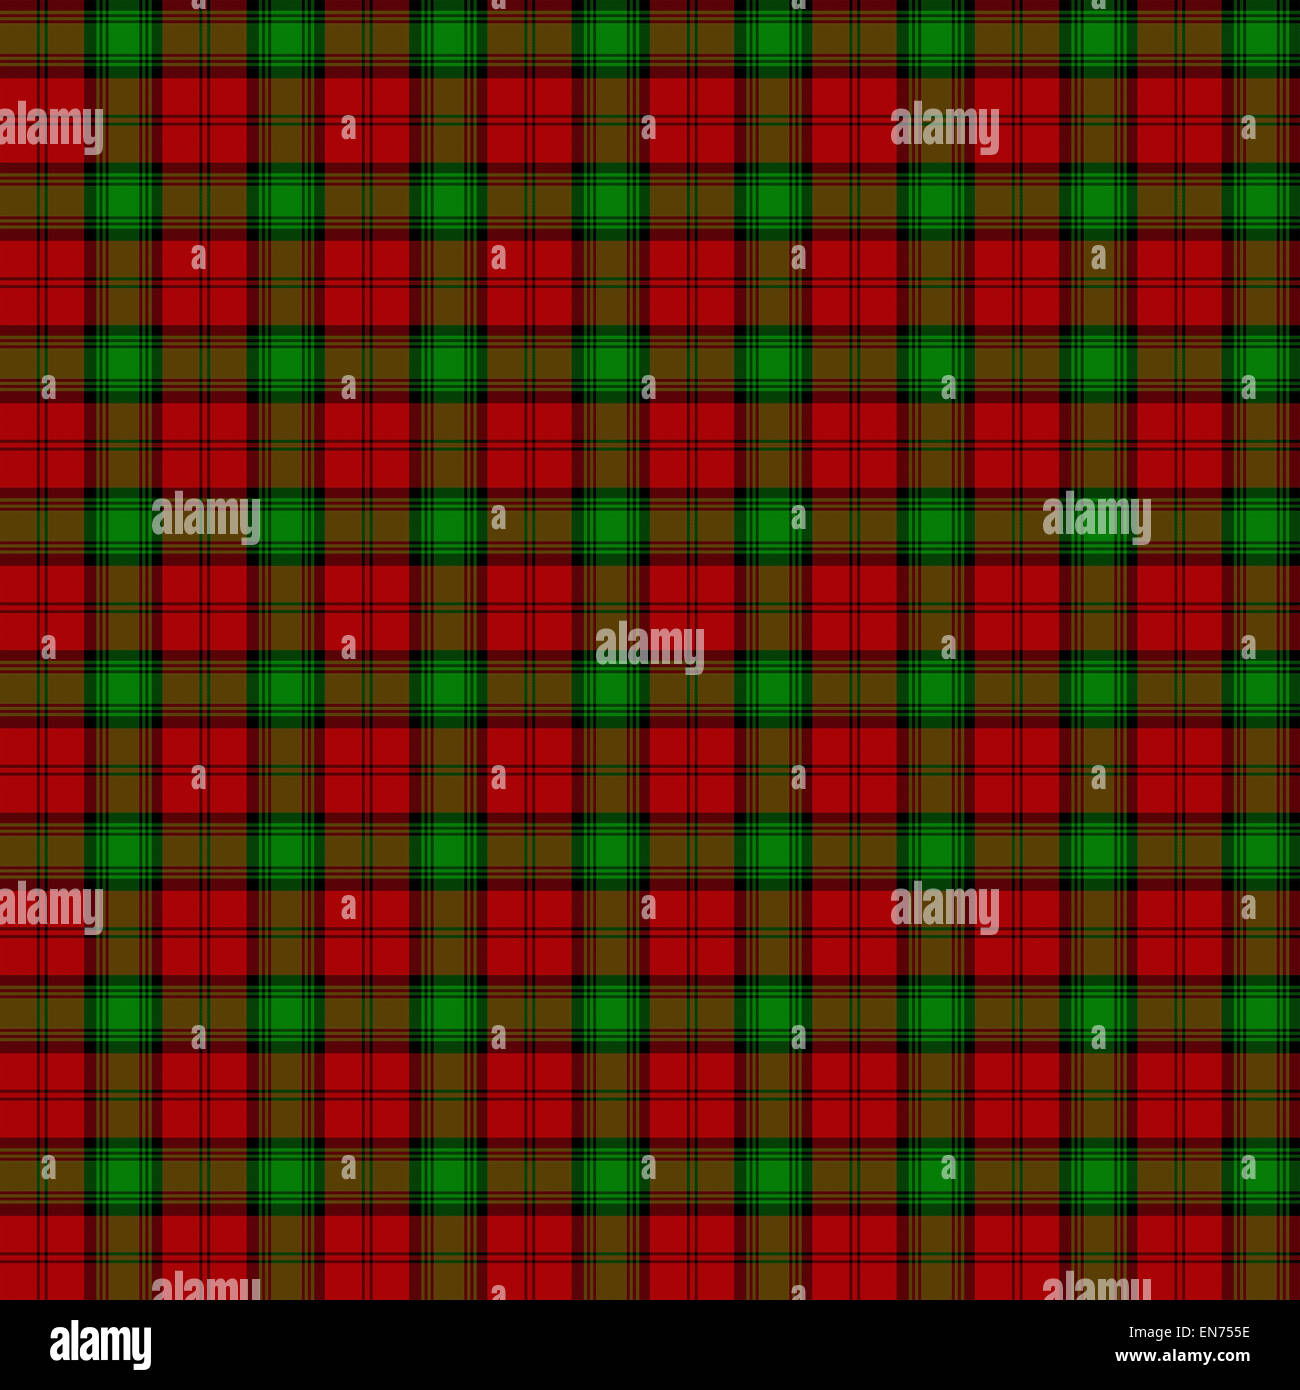 A seamless patterned tile of the clan Auchinleck tartan. Stock Photo